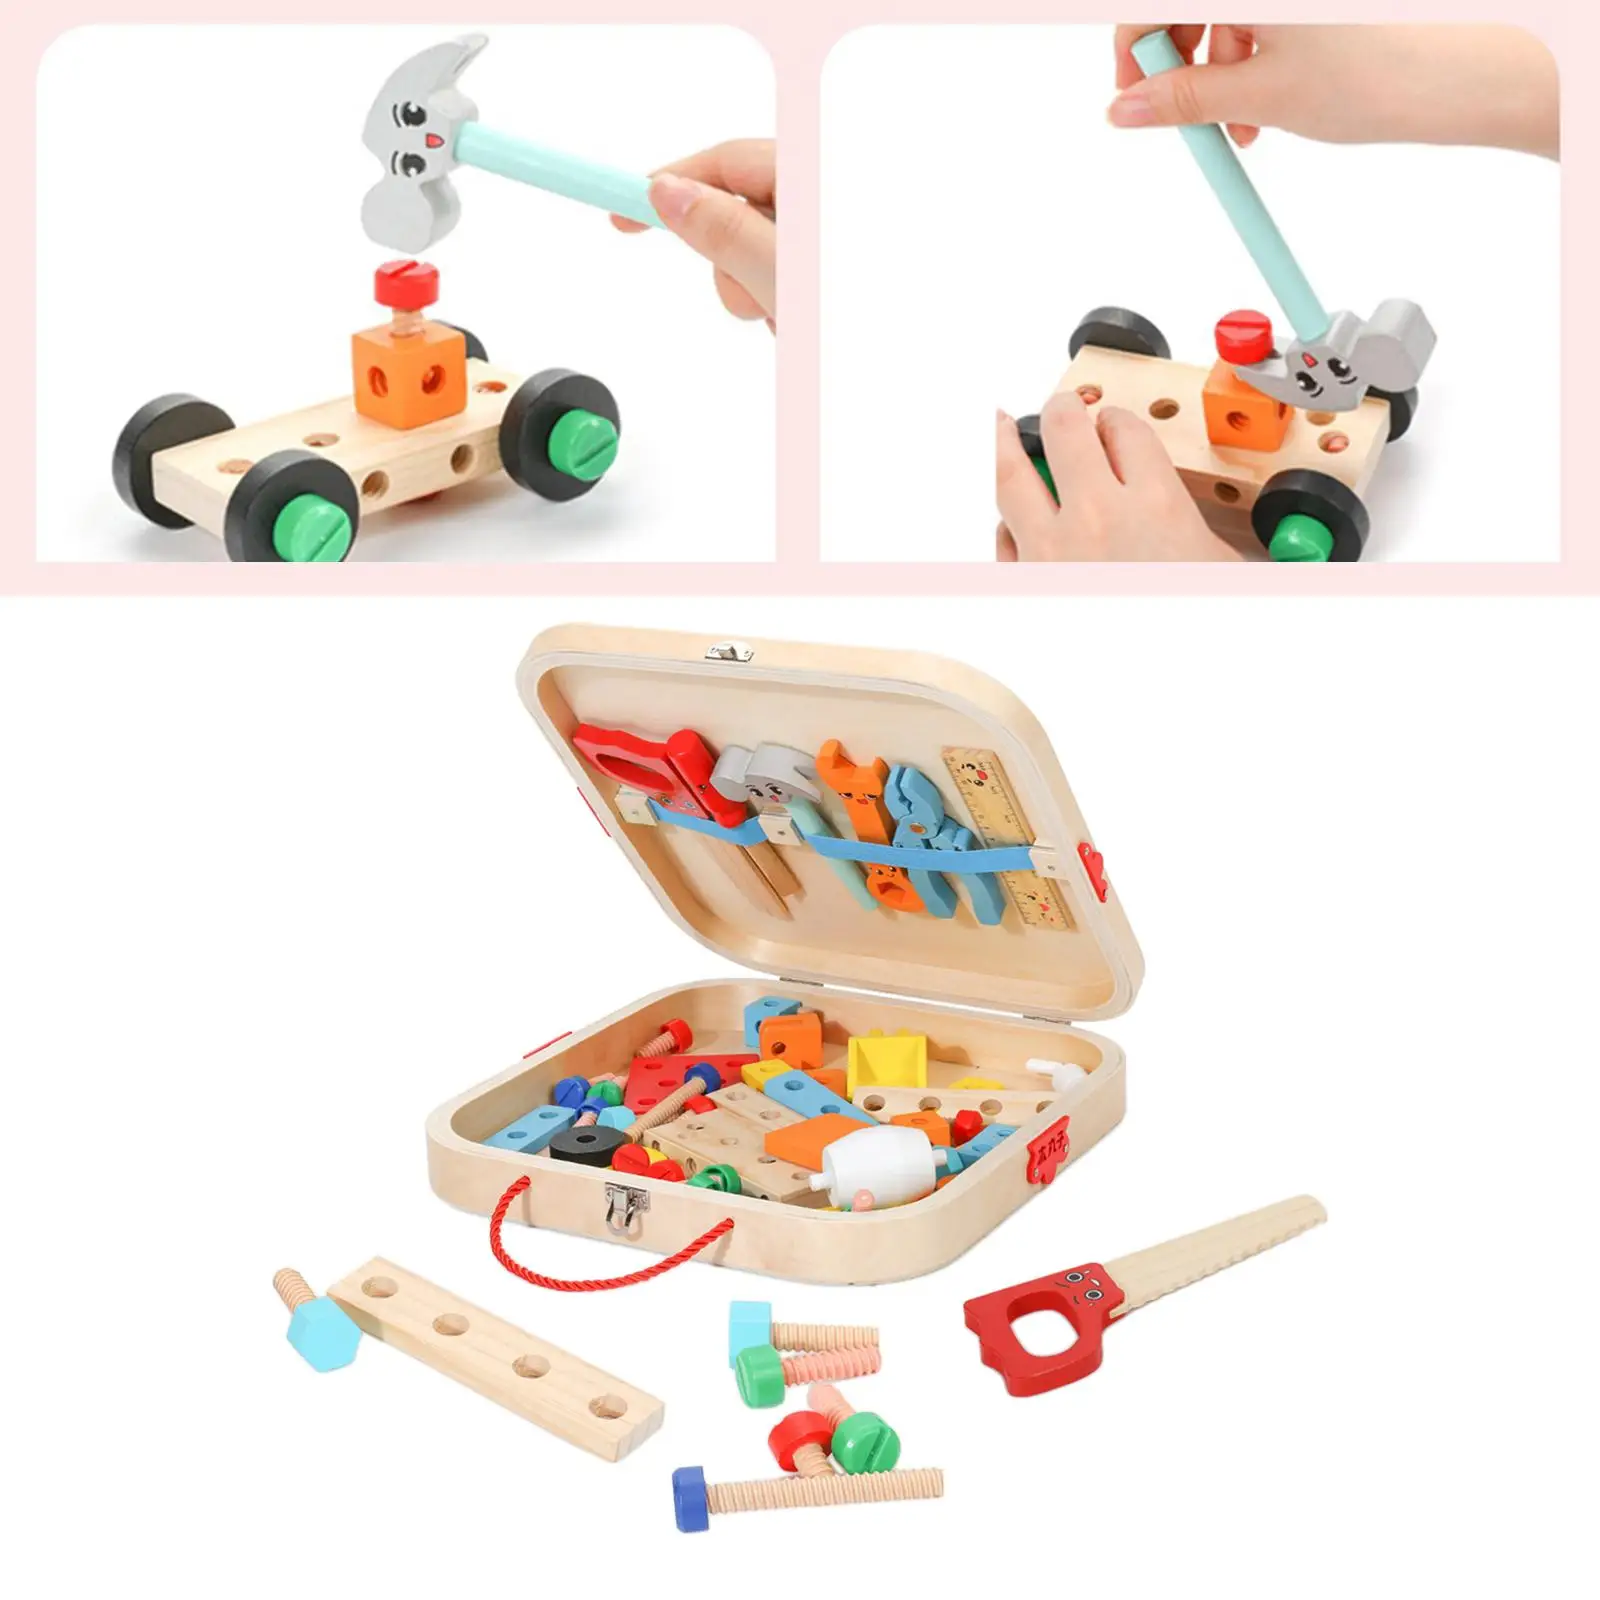 Kids Tool Set Pretend Toy Montessori Educational Gift Wooden Toddlers Tools Set Wooden Toy Tools Box for Bedrooml